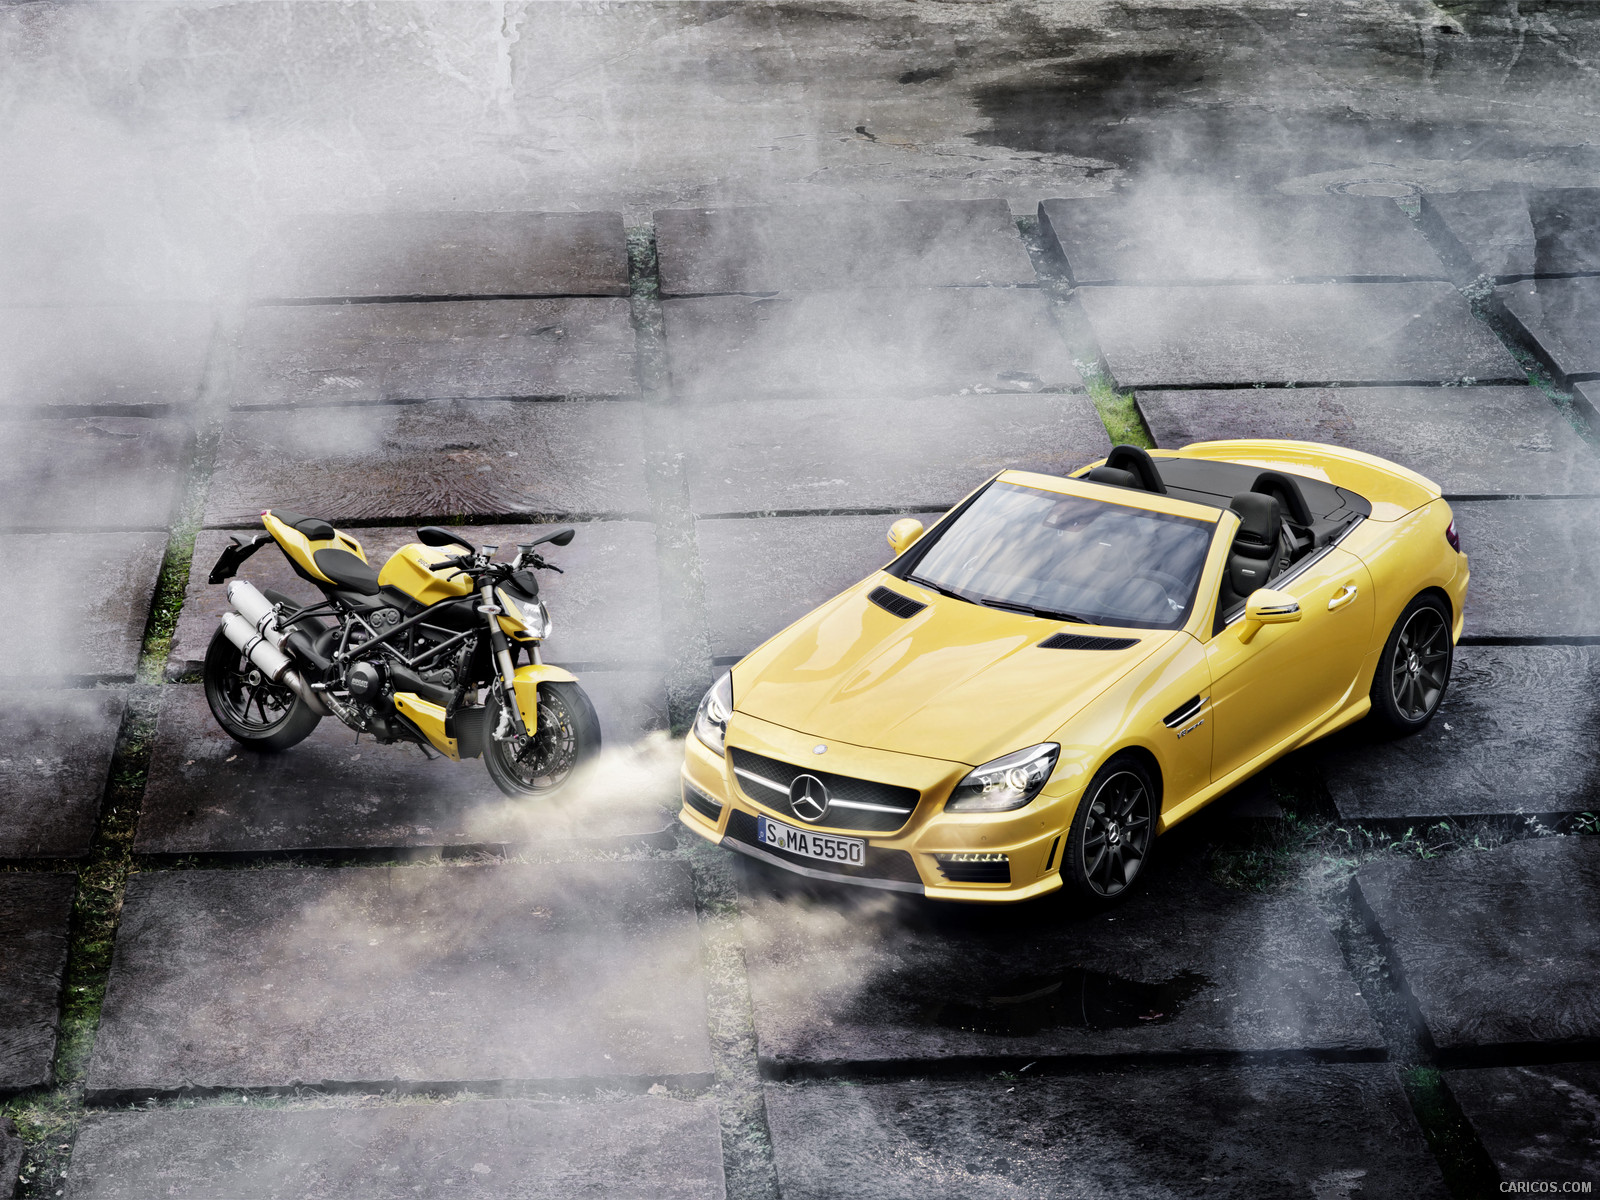 Mercedes-Benz SLK 55 AMG and Ducati Streetfighter 848 - , #45 of 47